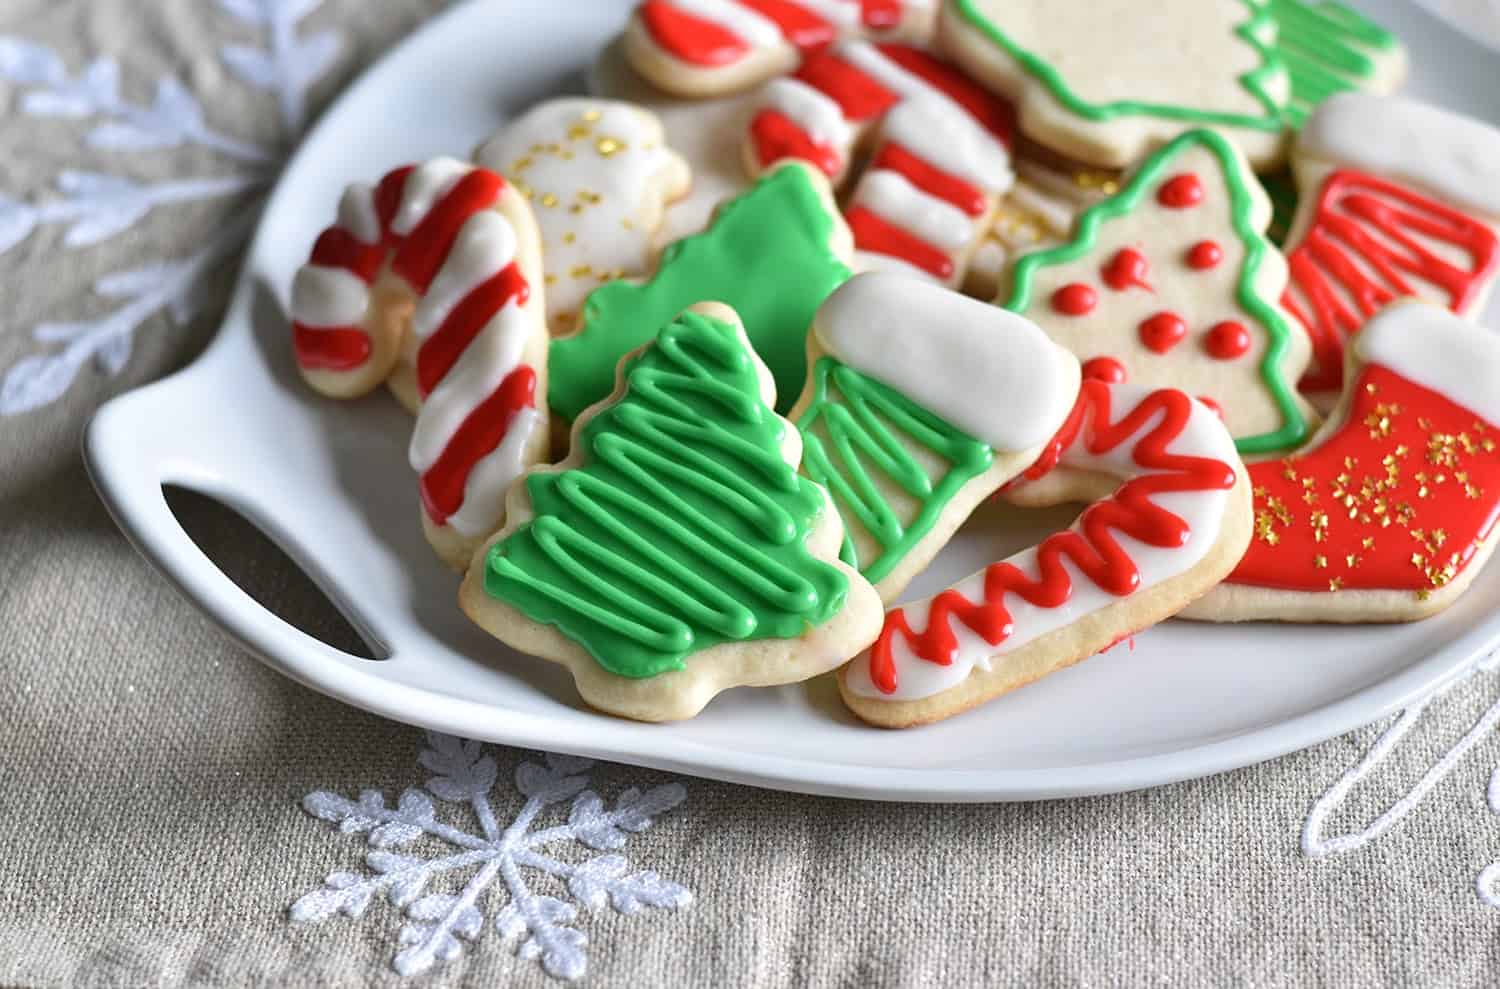 Christmas Cookies with festive decorations.